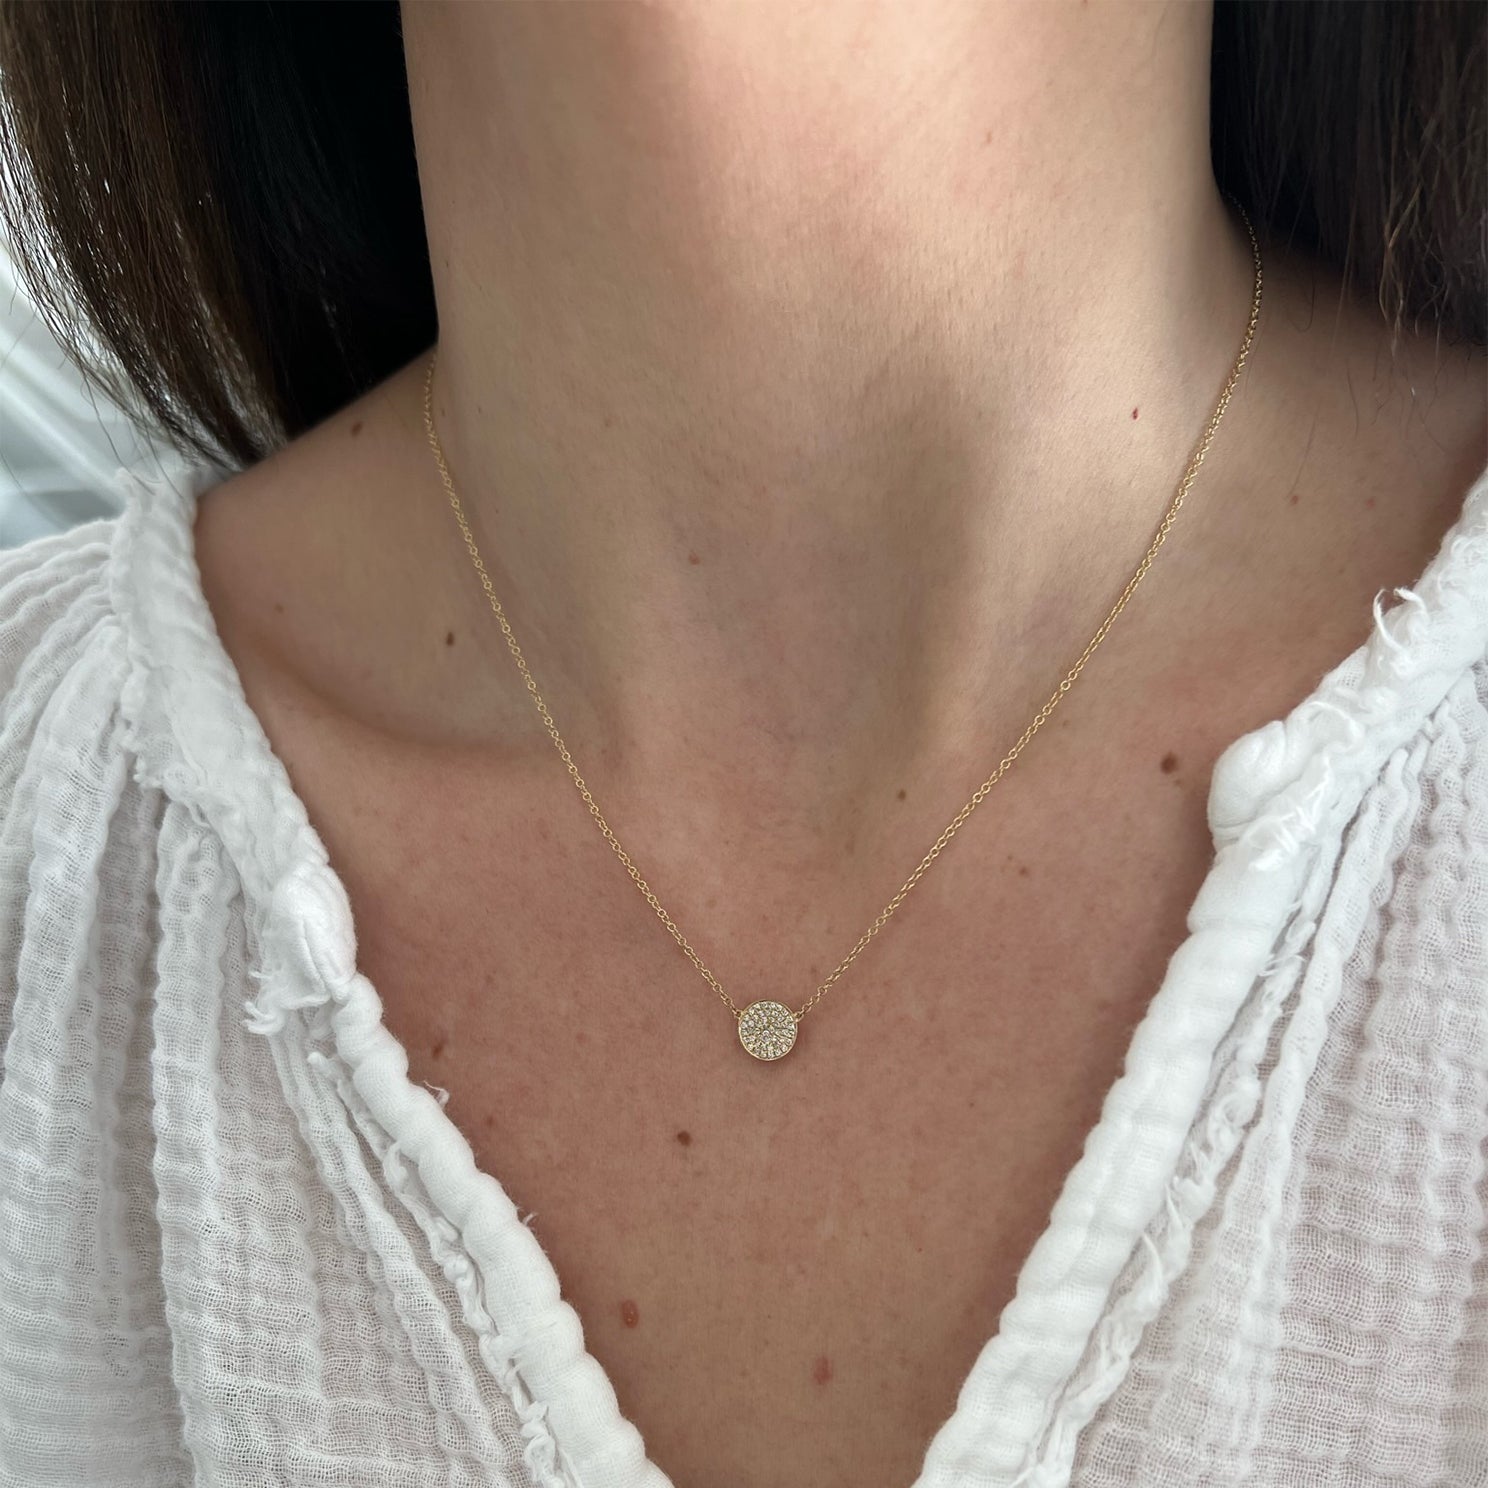 Diamond Disc Necklace in 14k yellow gold styled on neck of model wearing white blouse